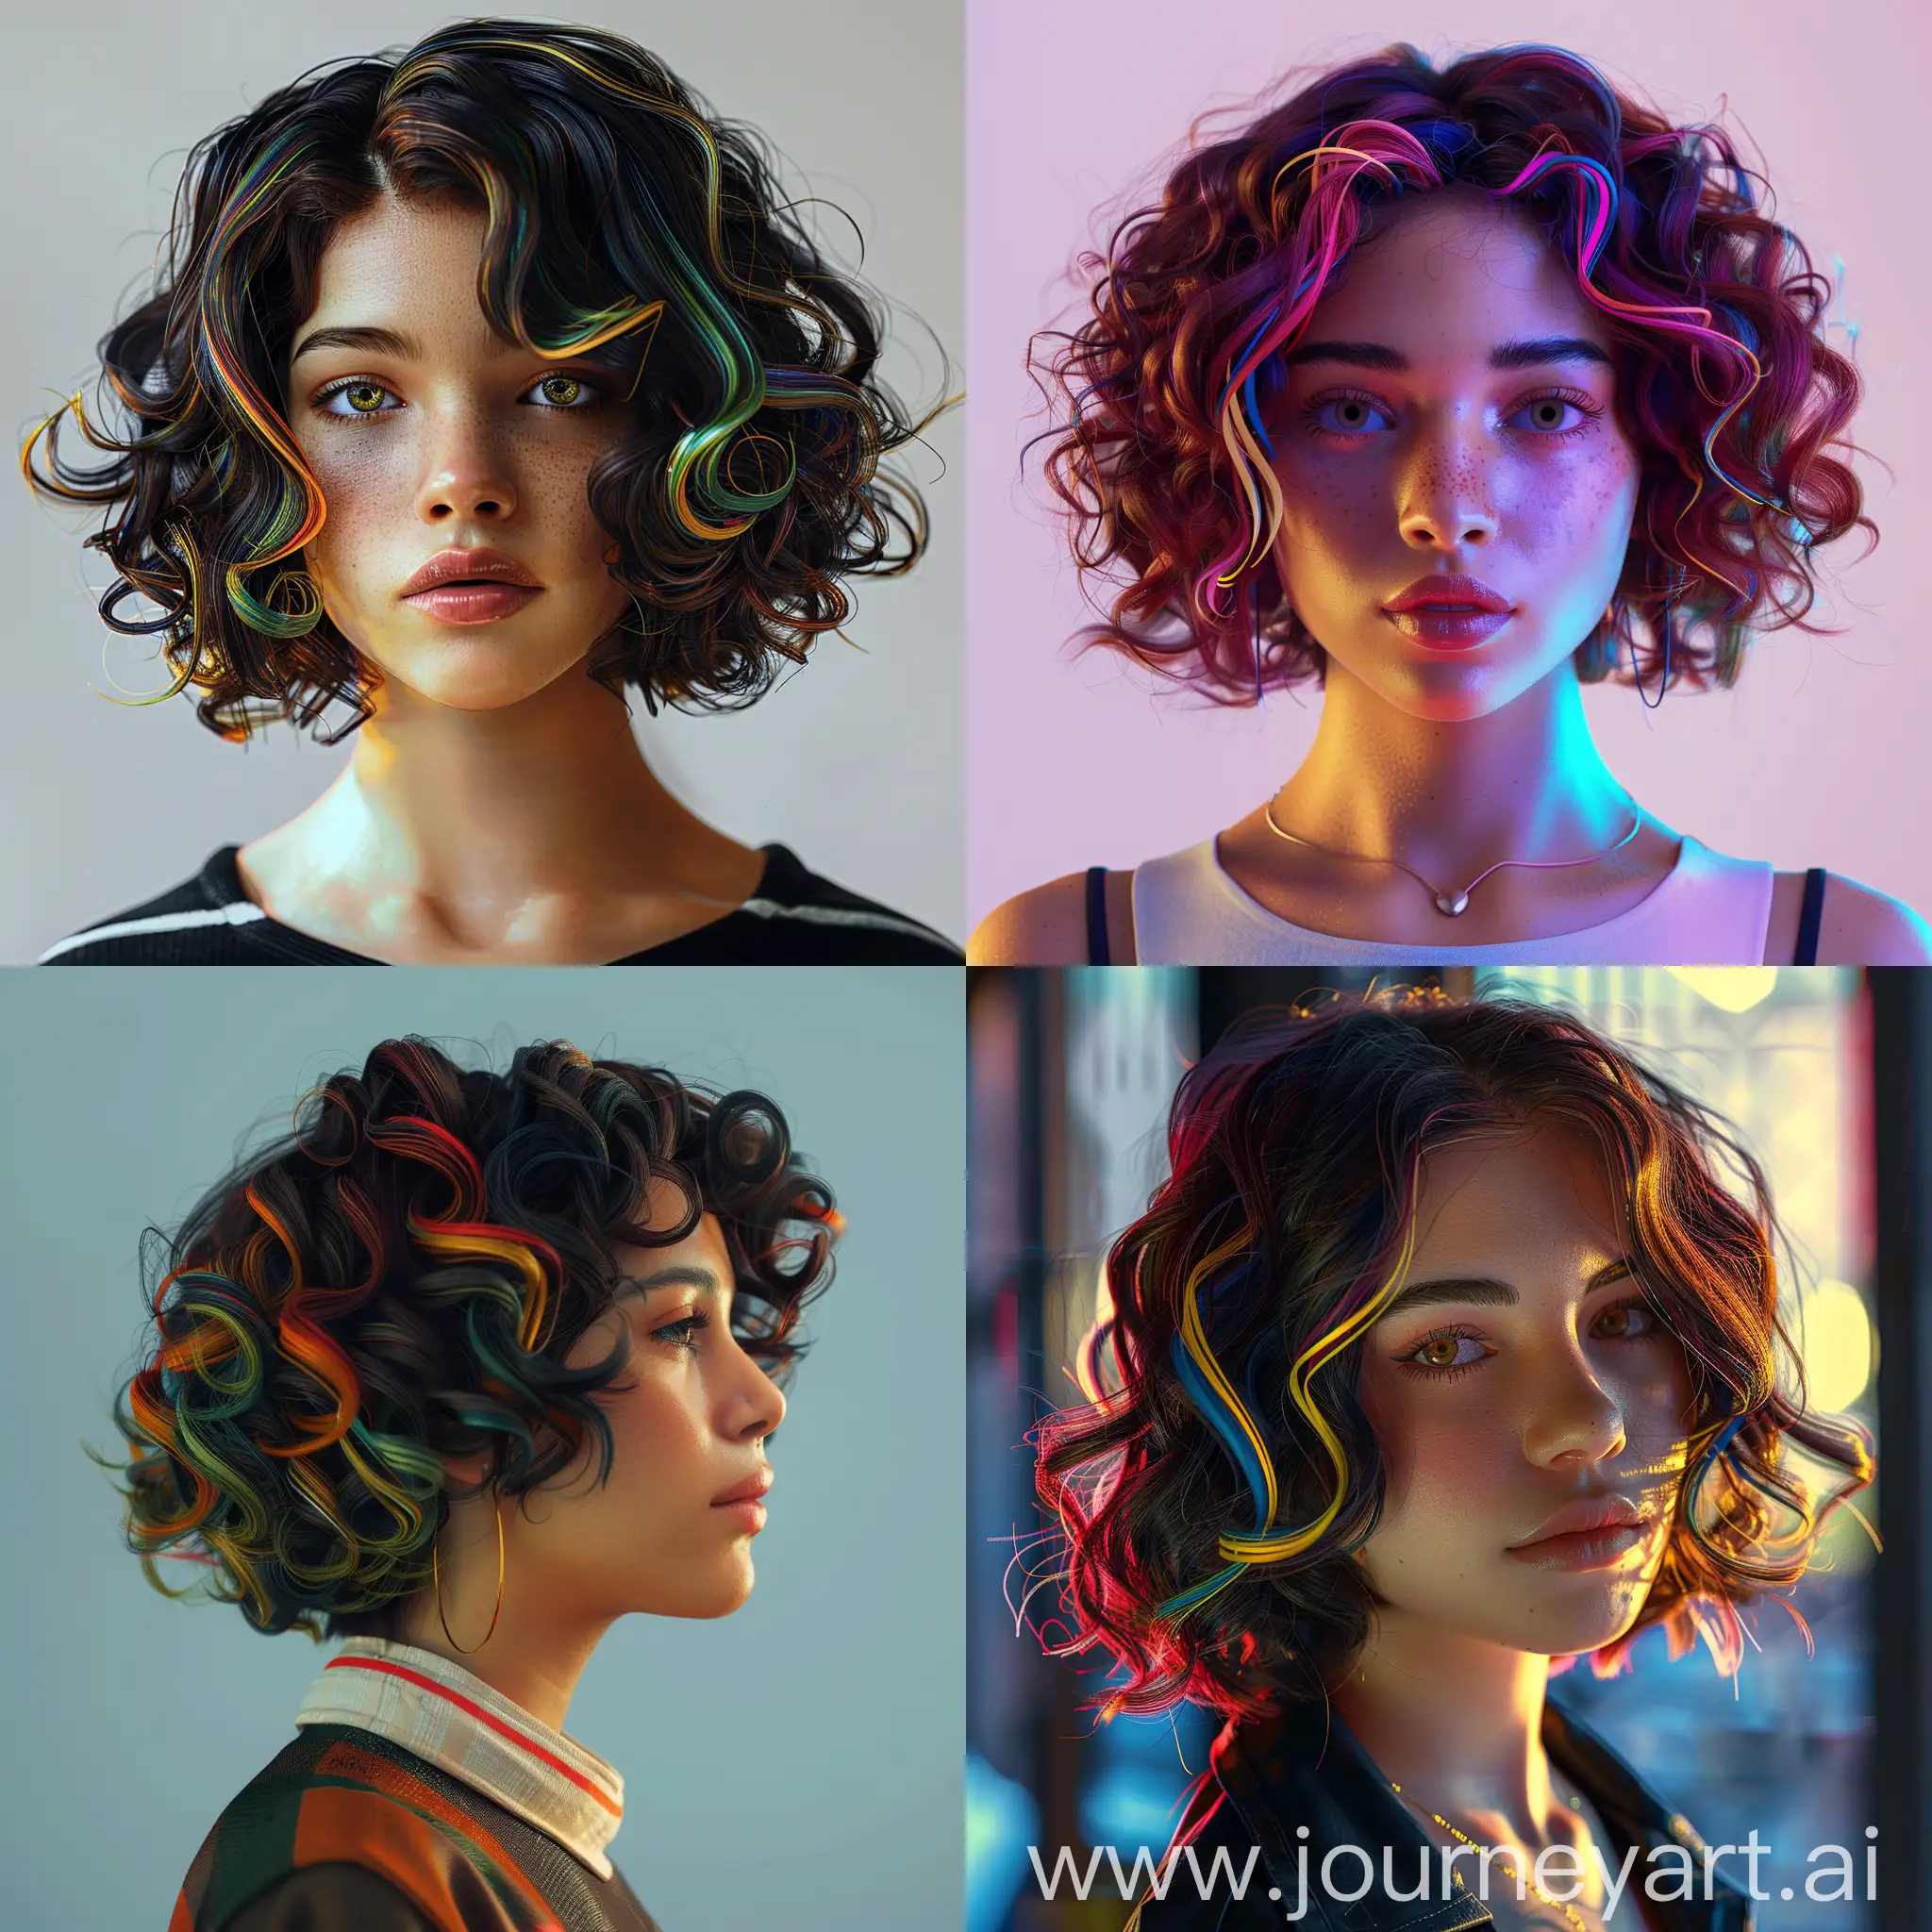 Latina-Young-Woman-with-Curly-Brown-Hair-and-Colorful-Highlights-Engaged-with-Technology-in-a-4K-SemiRealistic-Style